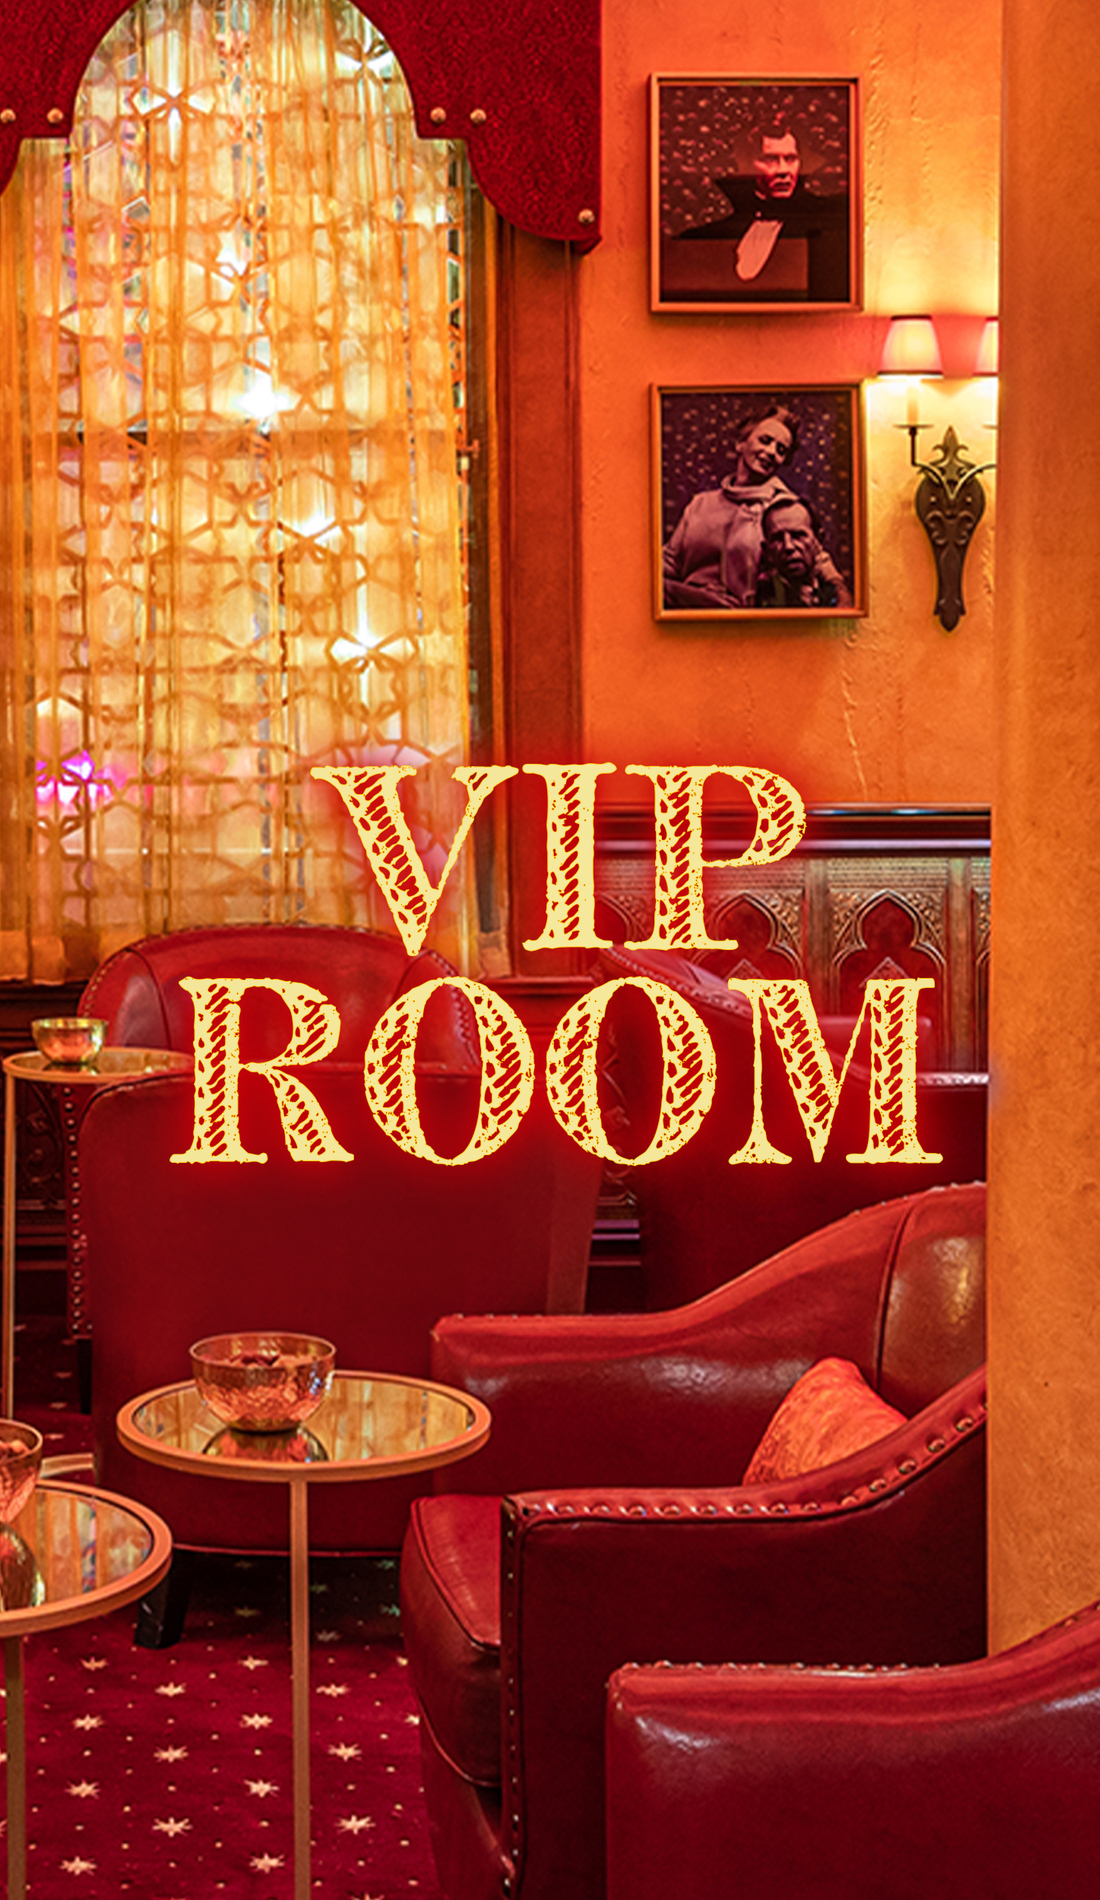 A Moulin Rouge! The Musical VIP Room Experience live event